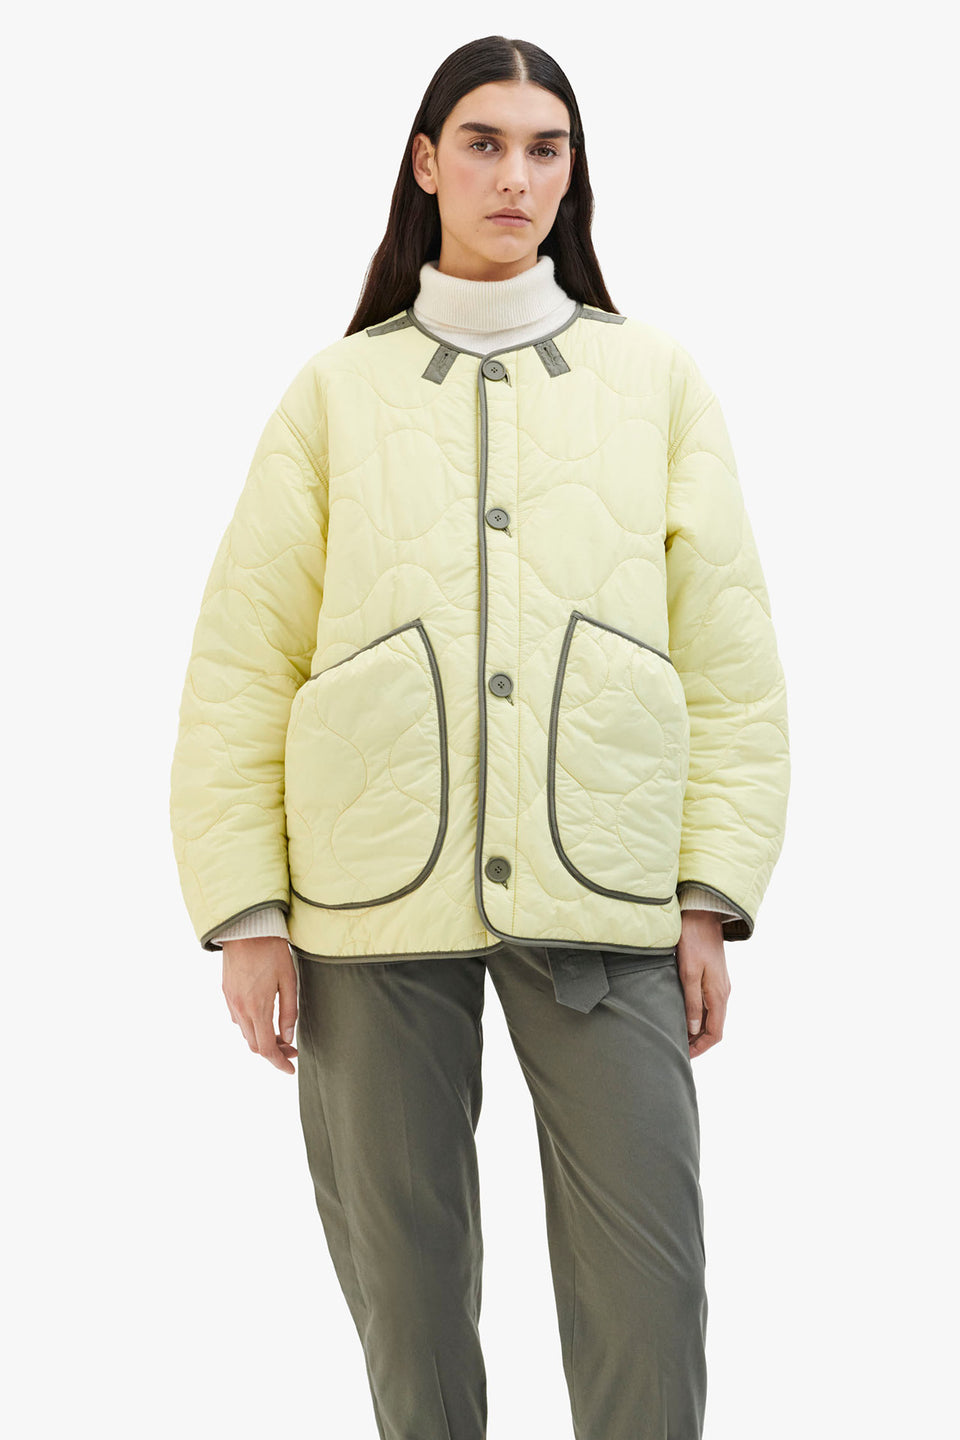 Cropped Quilt Jacket - Bronze / Pale Yellow (listing page thumbnail)